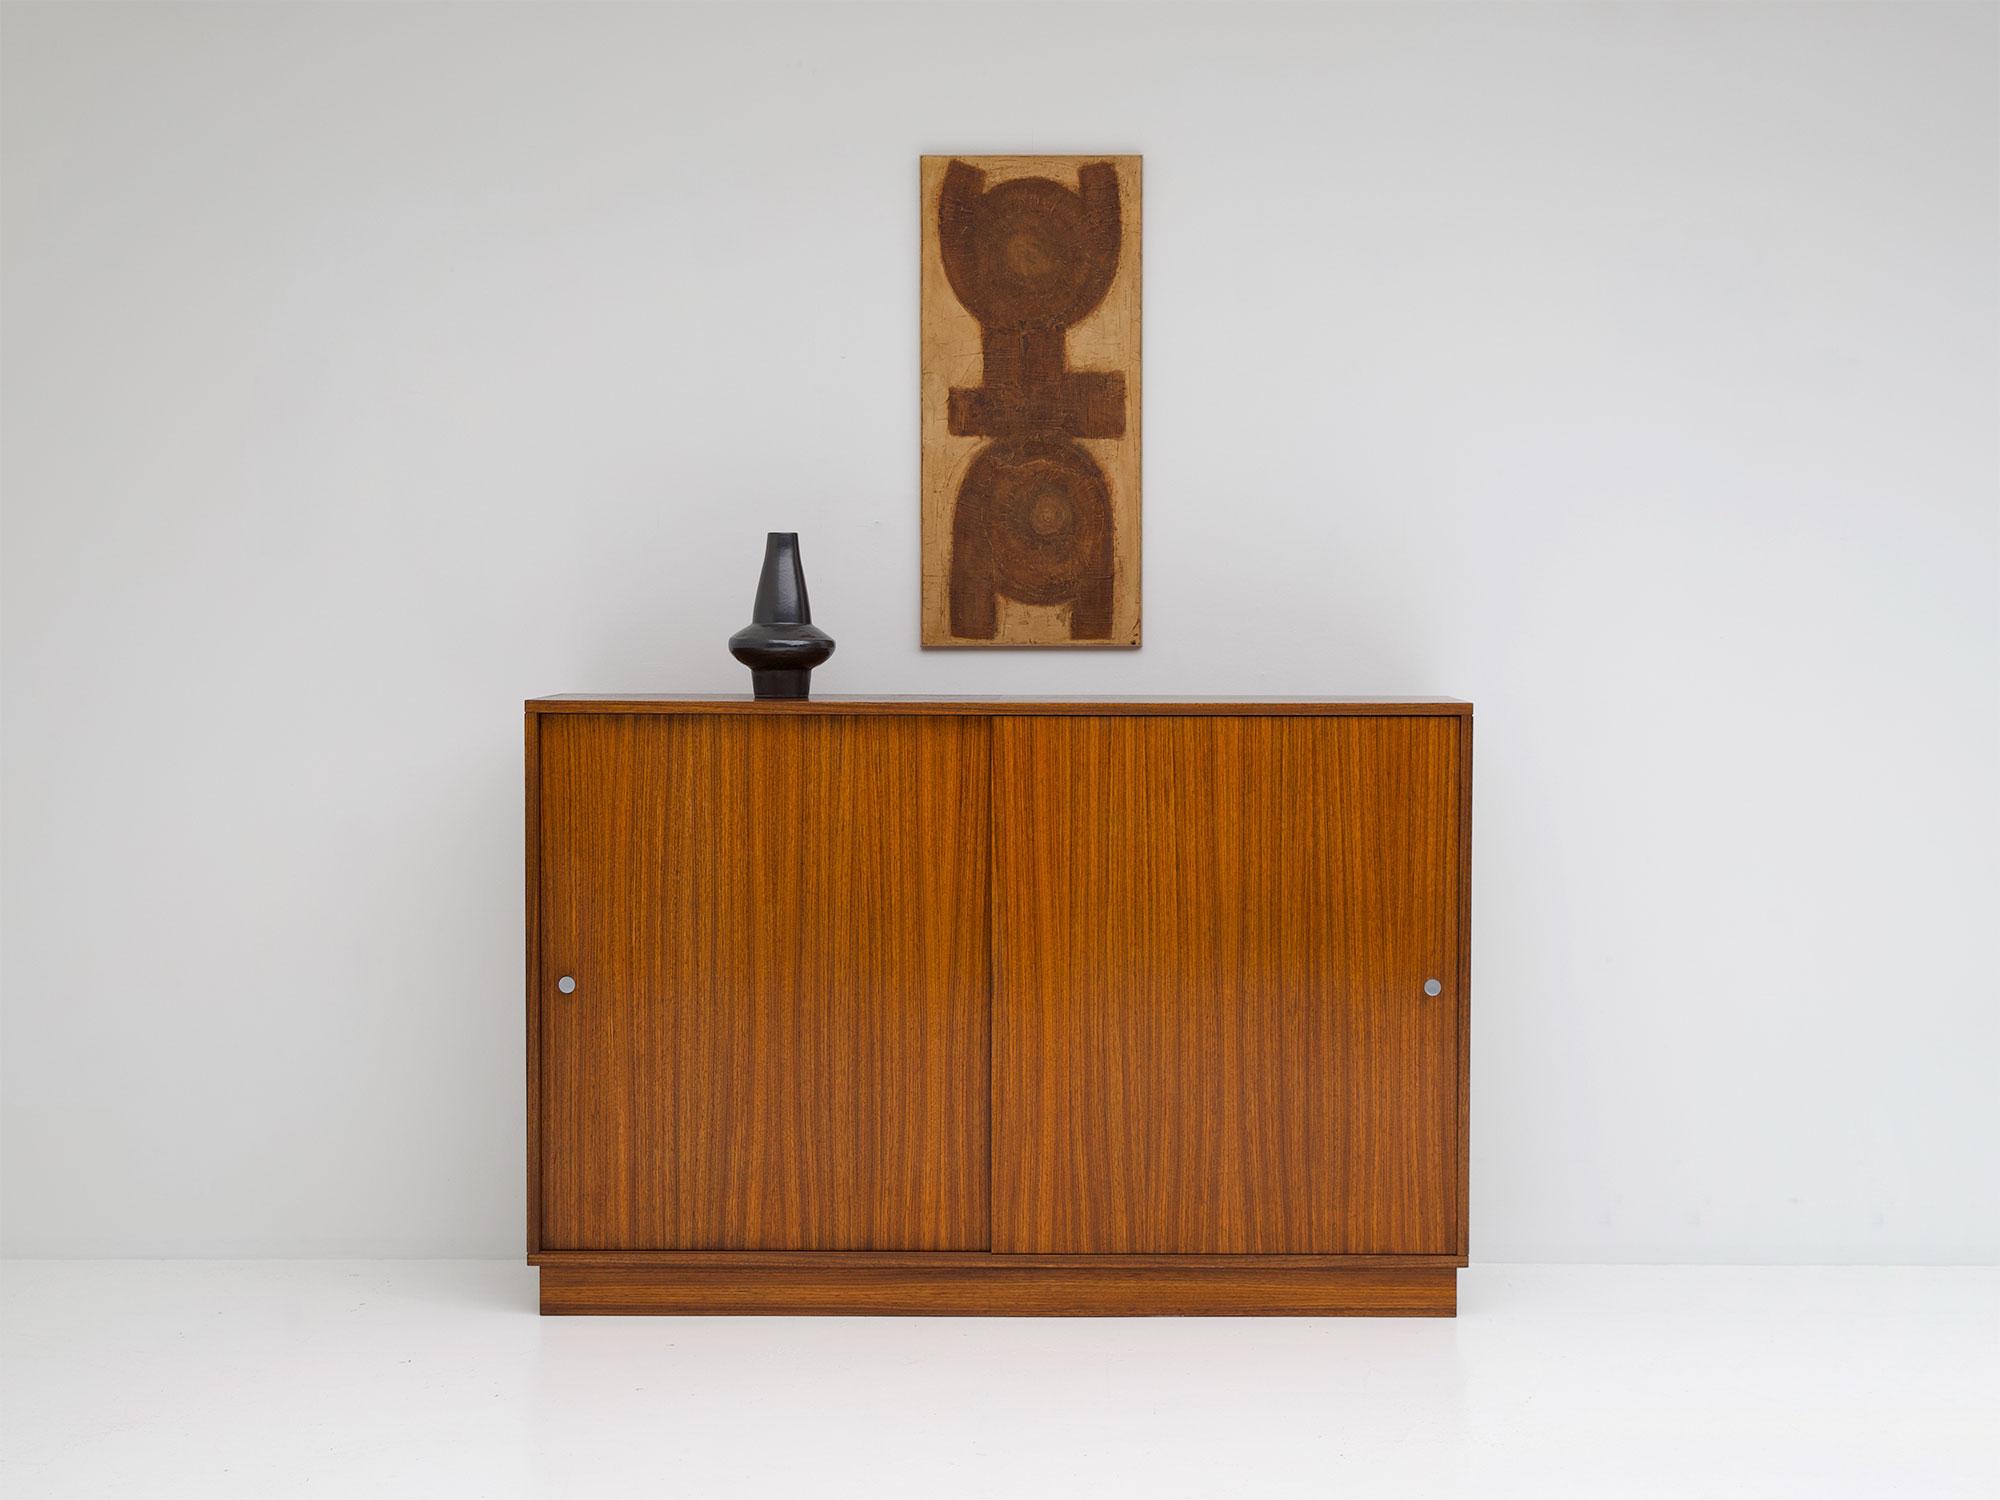 Alfred Hendrickx, Belgian modern, zingana wood, sliding doors, Belform Belgium 1960s

This cabinet was designed by Alfred Hendrickx for Belform in the mid-1960s. It has two sliding doors and offers a lot of storage space due the shelves inside.